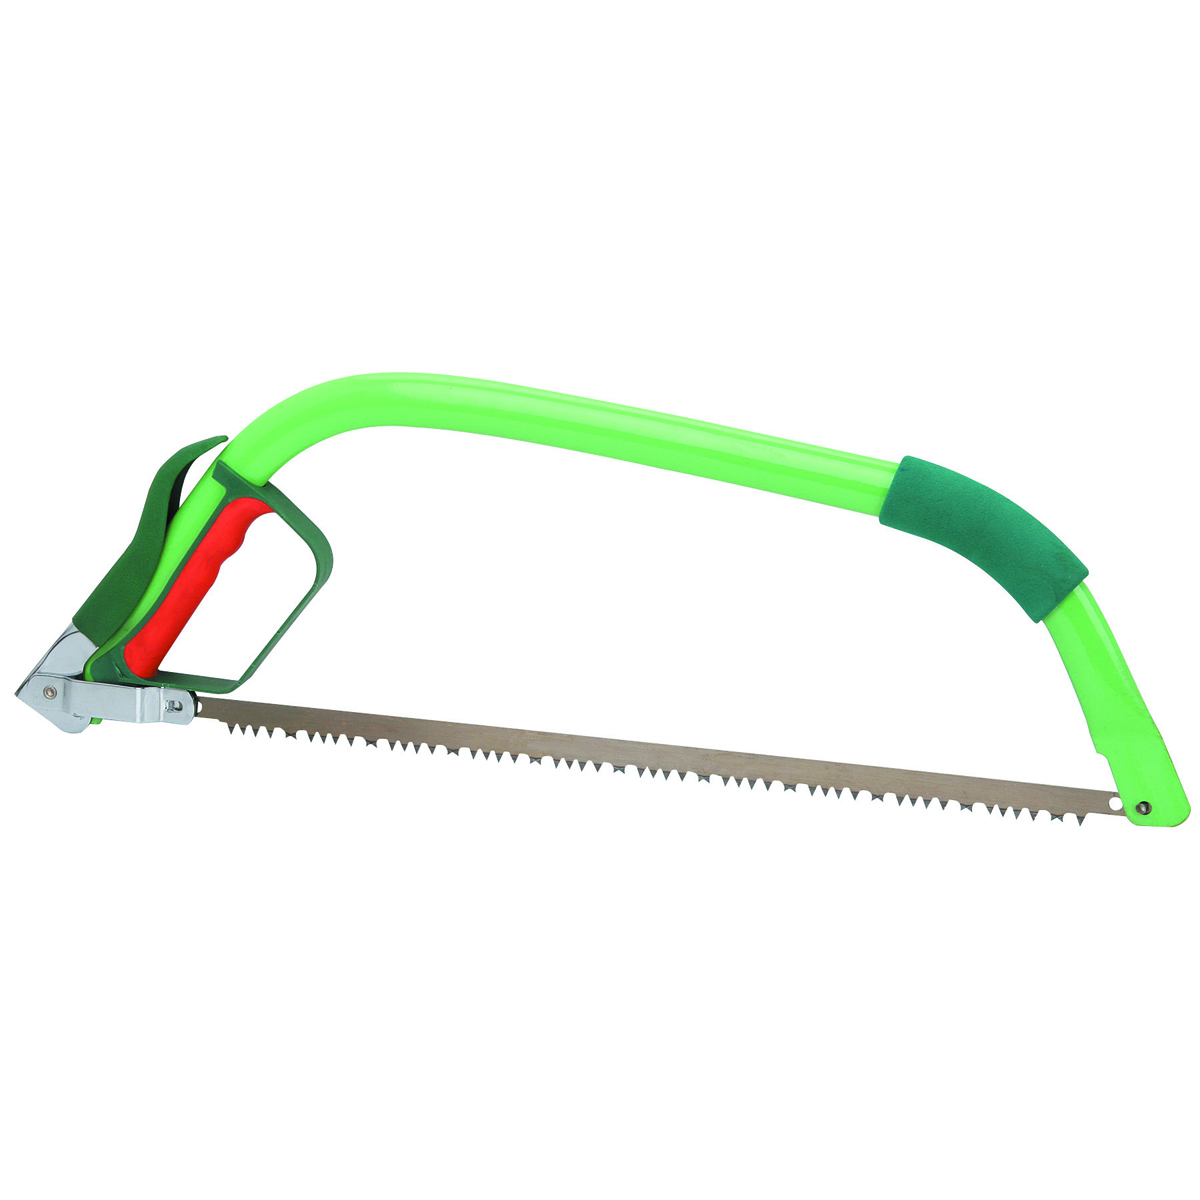 ONE STOP GARDENS 21 in. Bow Saw - Item 66545